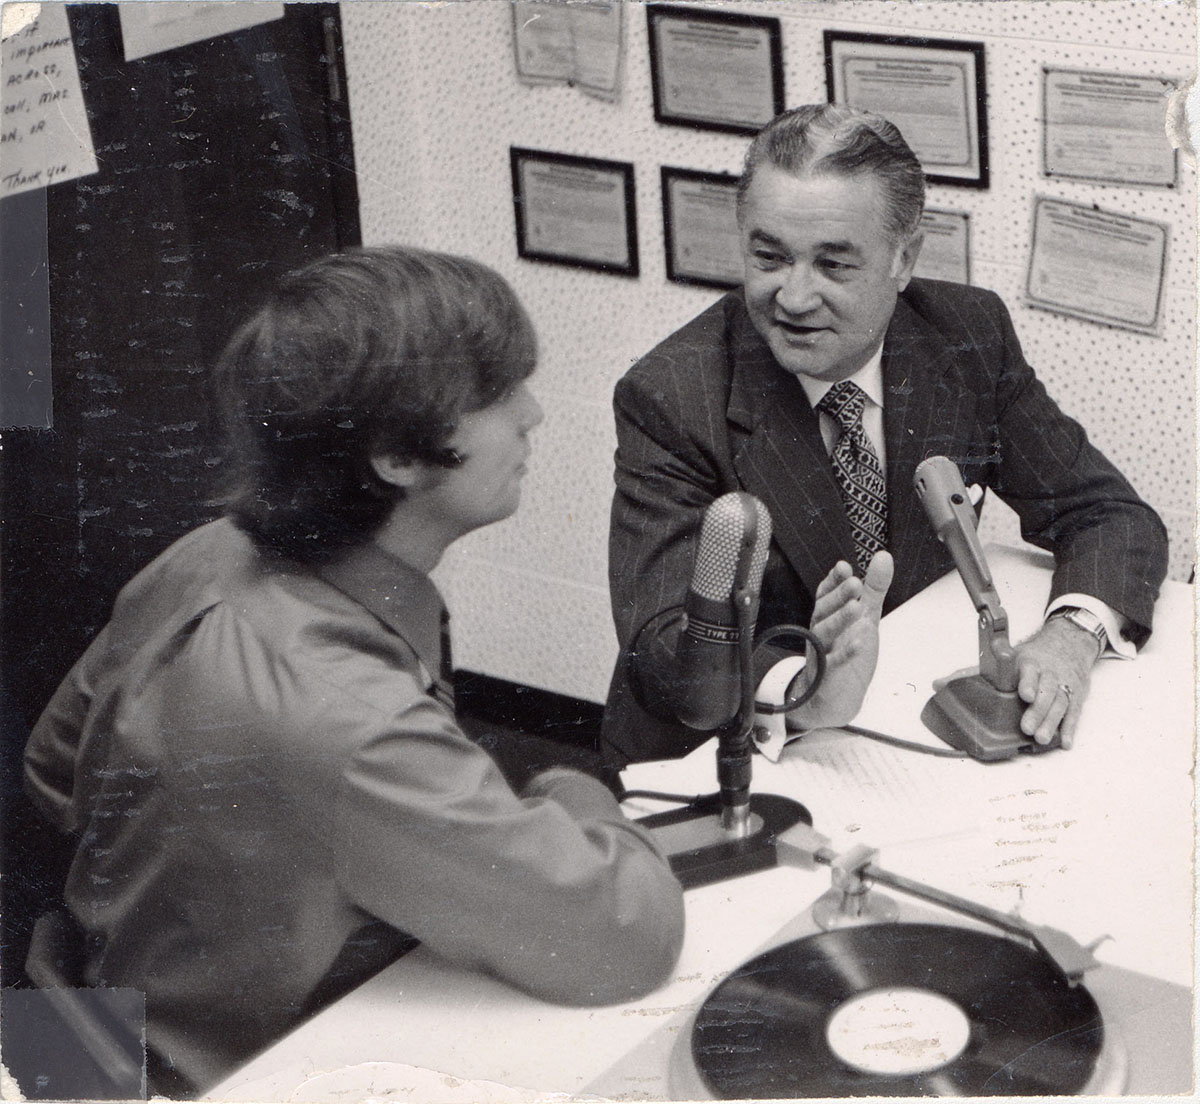 Robert Foster was instrumental in pushing for enhancements to Northwest's radio broadcast studios,